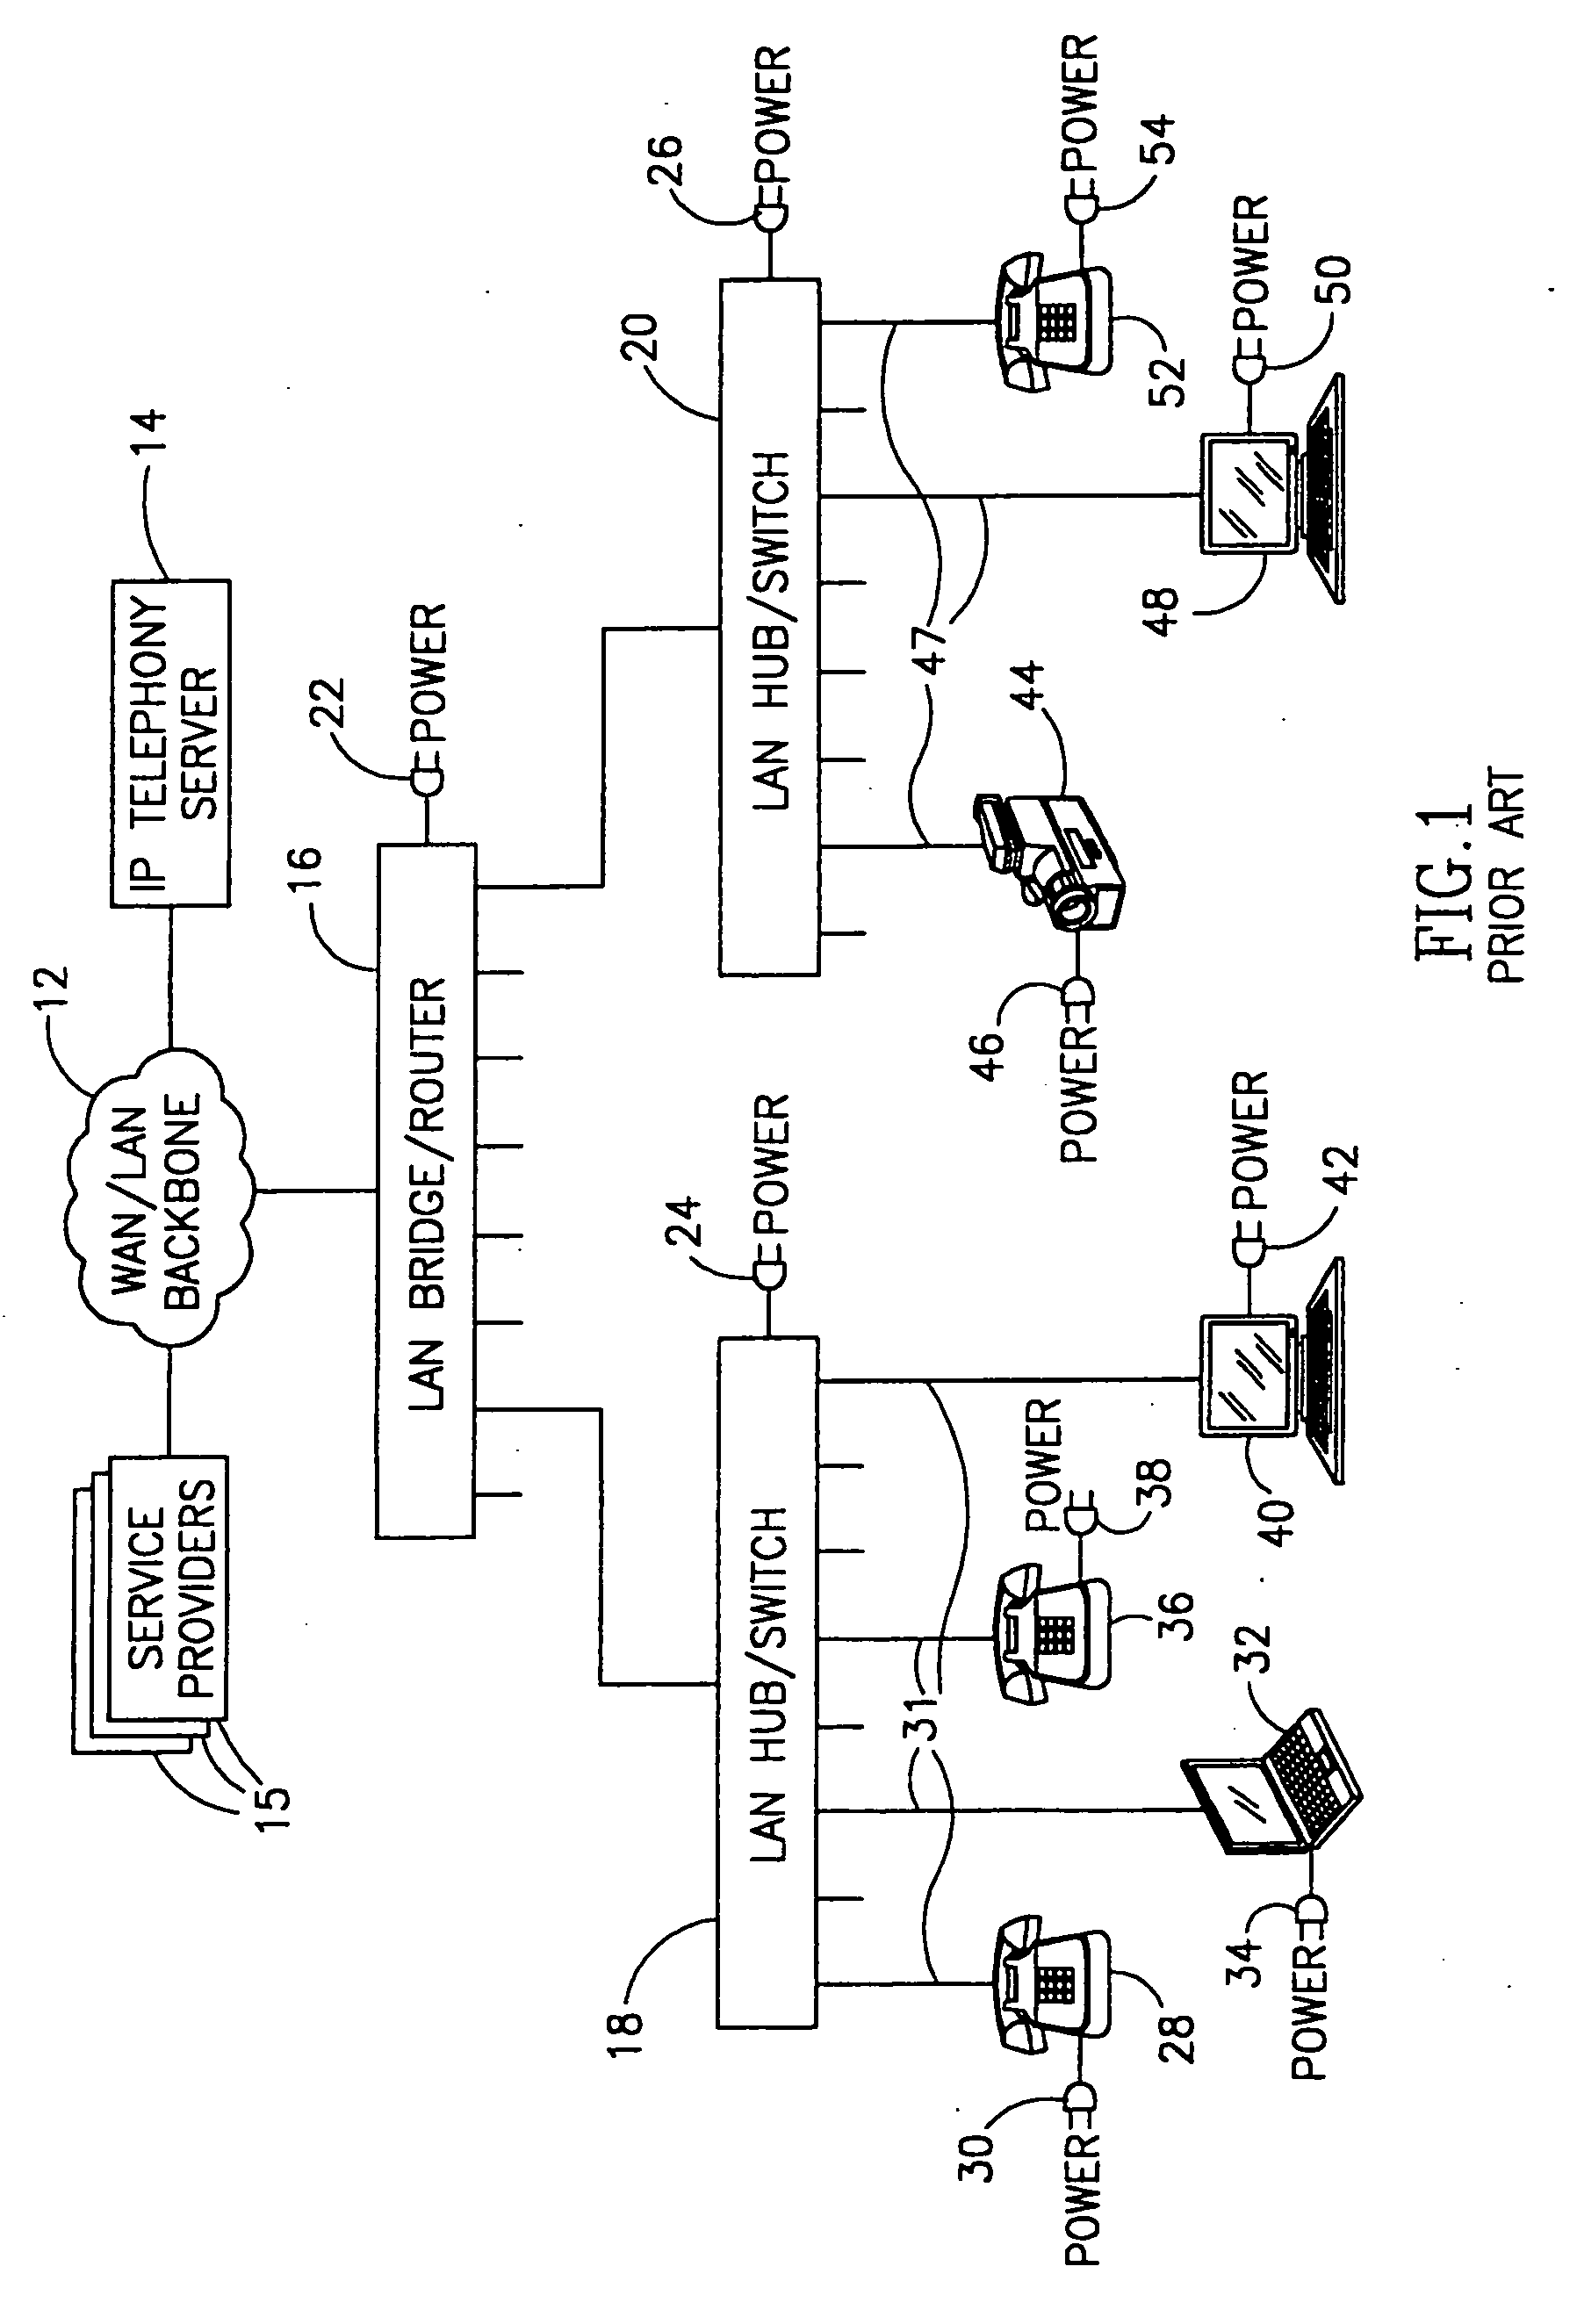 Combiner for power delivery over data communication cabling infrastructure